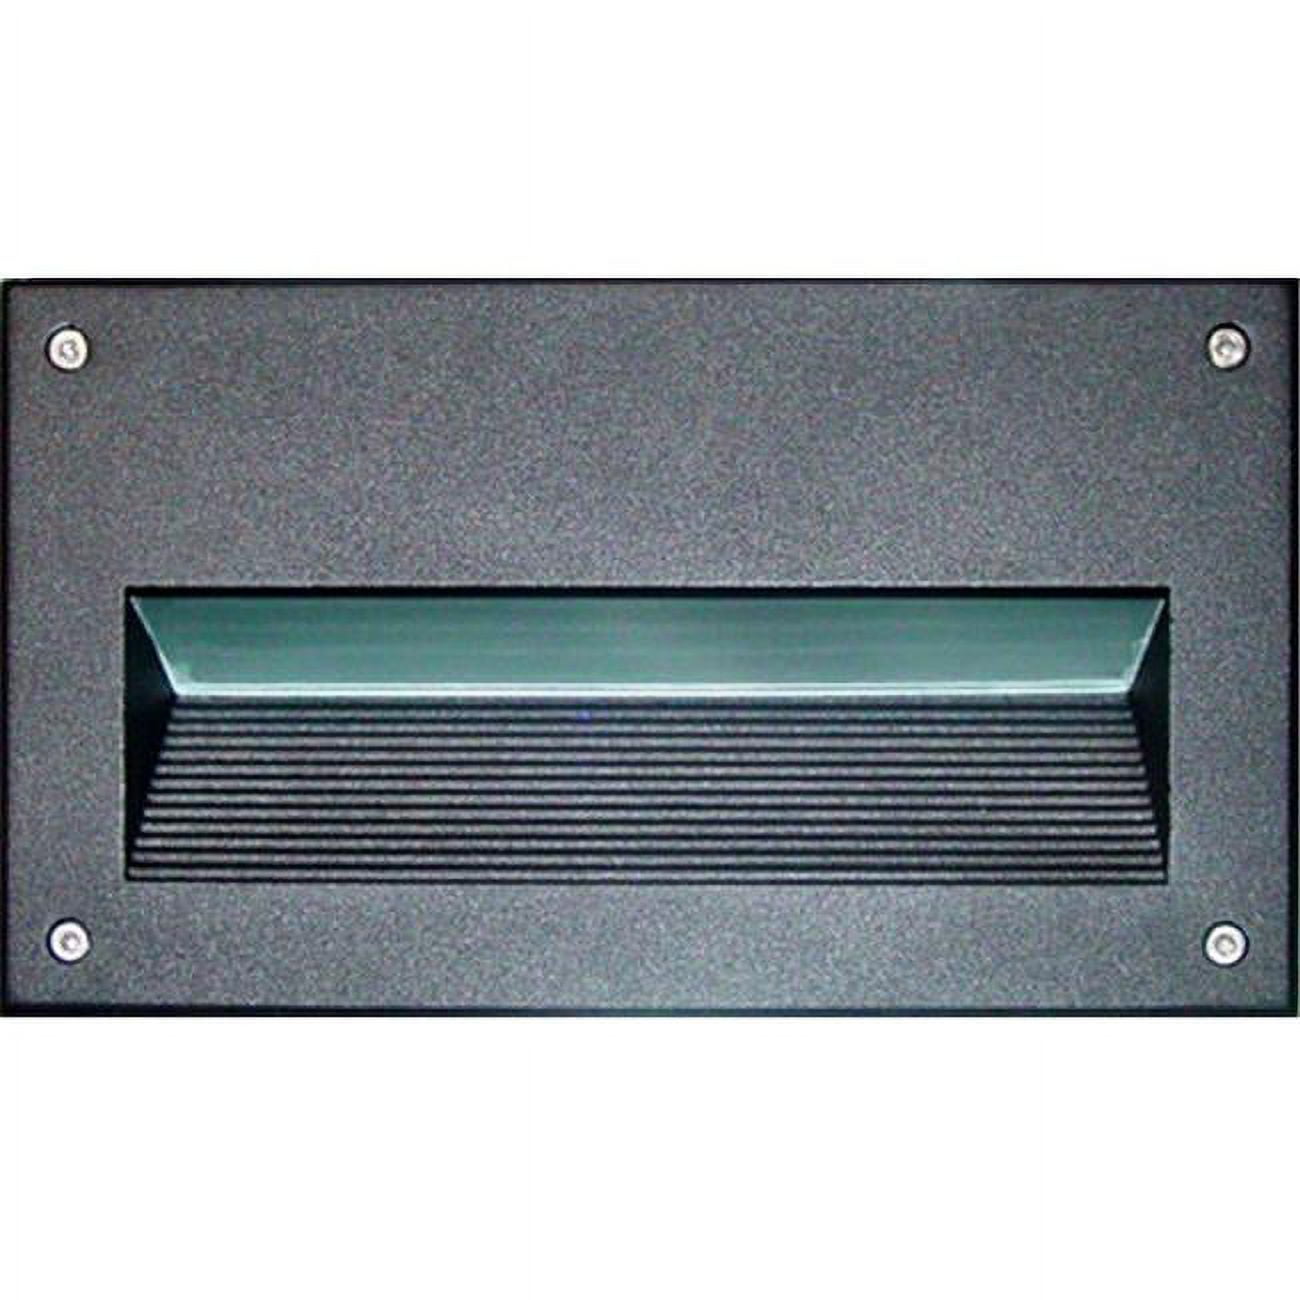 Picture of Dabmar Lighting DSL1003-B Recessed Brick, Step & Wall Light, Black - 4.95 x 8.80 x 2.90 in.